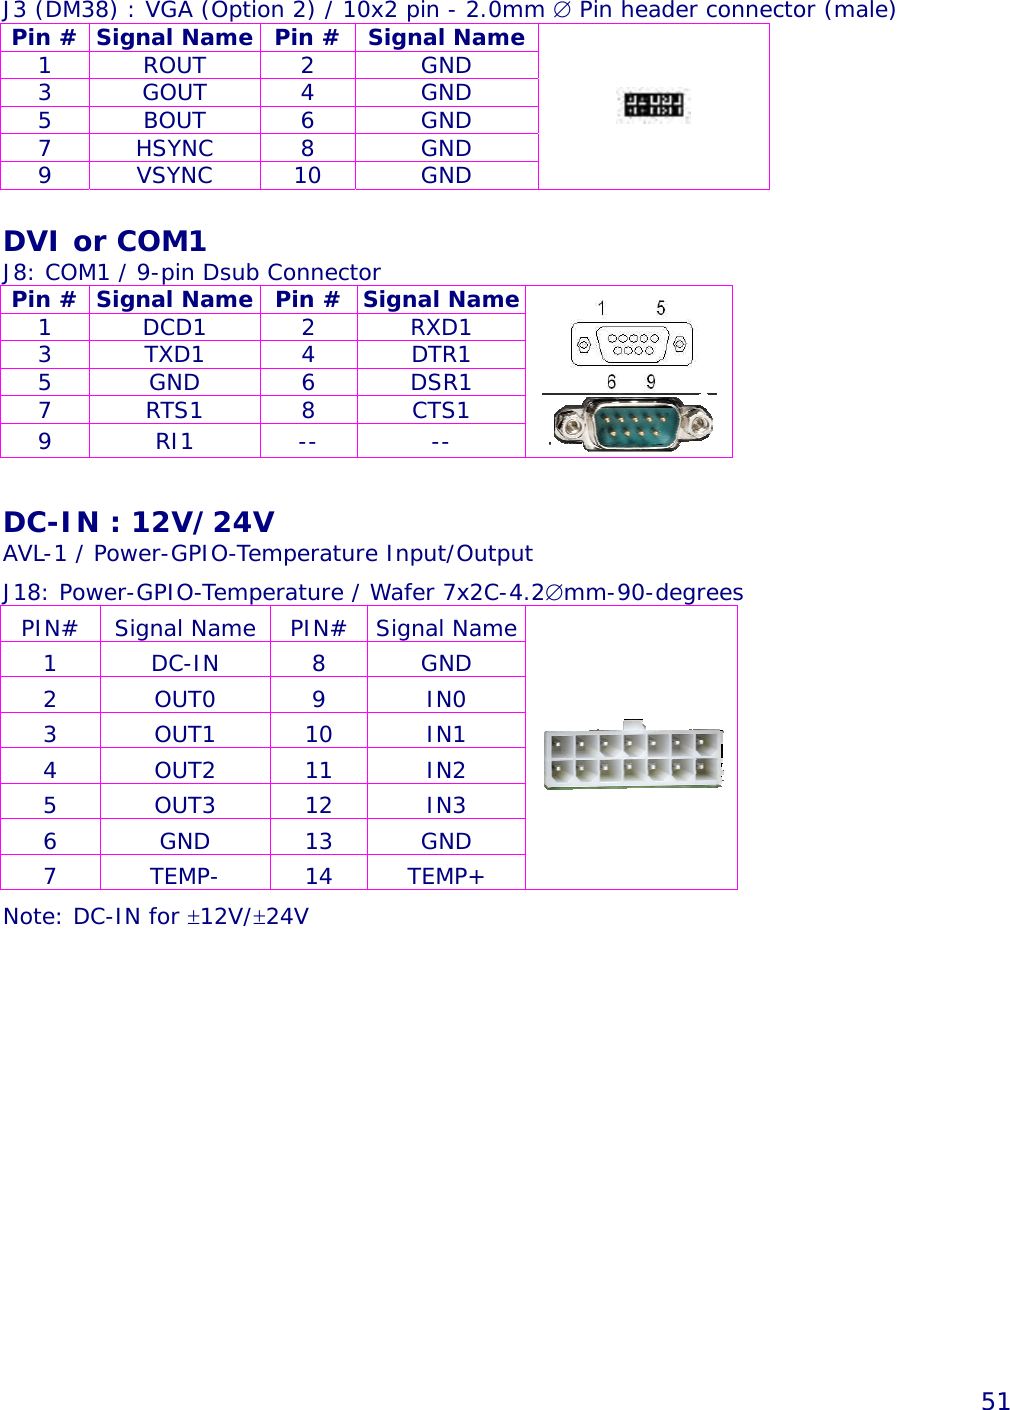   51 J3 (DM38) : VGA (Option 2) / 10x2 pin - 2.0mm ∅ Pin header connector (male) Pin #  Signal Name Pin #  Signal Name 1 ROUT 2  GND 3 GOUT 4  GND 5 BOUT 6  GND 7 HSYNC 8  GND 9 VSYNC 10  GND   DVI or COM1 J8: COM1 / 9-pin Dsub Connector Pin #  Signal Name Pin #  Signal Name 1 DCD1 2 RXD1 3 TXD1 4 DTR1 5 GND 6 DSR1 7 RTS1 8 CTS1 9 RI1 --  --       DC-IN : 12V/24V AVL-1 / Power-GPIO-Temperature Input/Output J18: Power-GPIO-Temperature / Wafer 7x2C-4.2∅mm-90-degrees PIN# Signal Name PIN# Signal Name 1 DC-IN 8 GND 2 OUT0 9 IN0 3 OUT1 10 IN1 4 OUT2 11 IN2 5 OUT3 12 IN3 6 GND 13 GND 7 TEMP- 14 TEMP+ Note: DC-IN for ±12V/±24V  